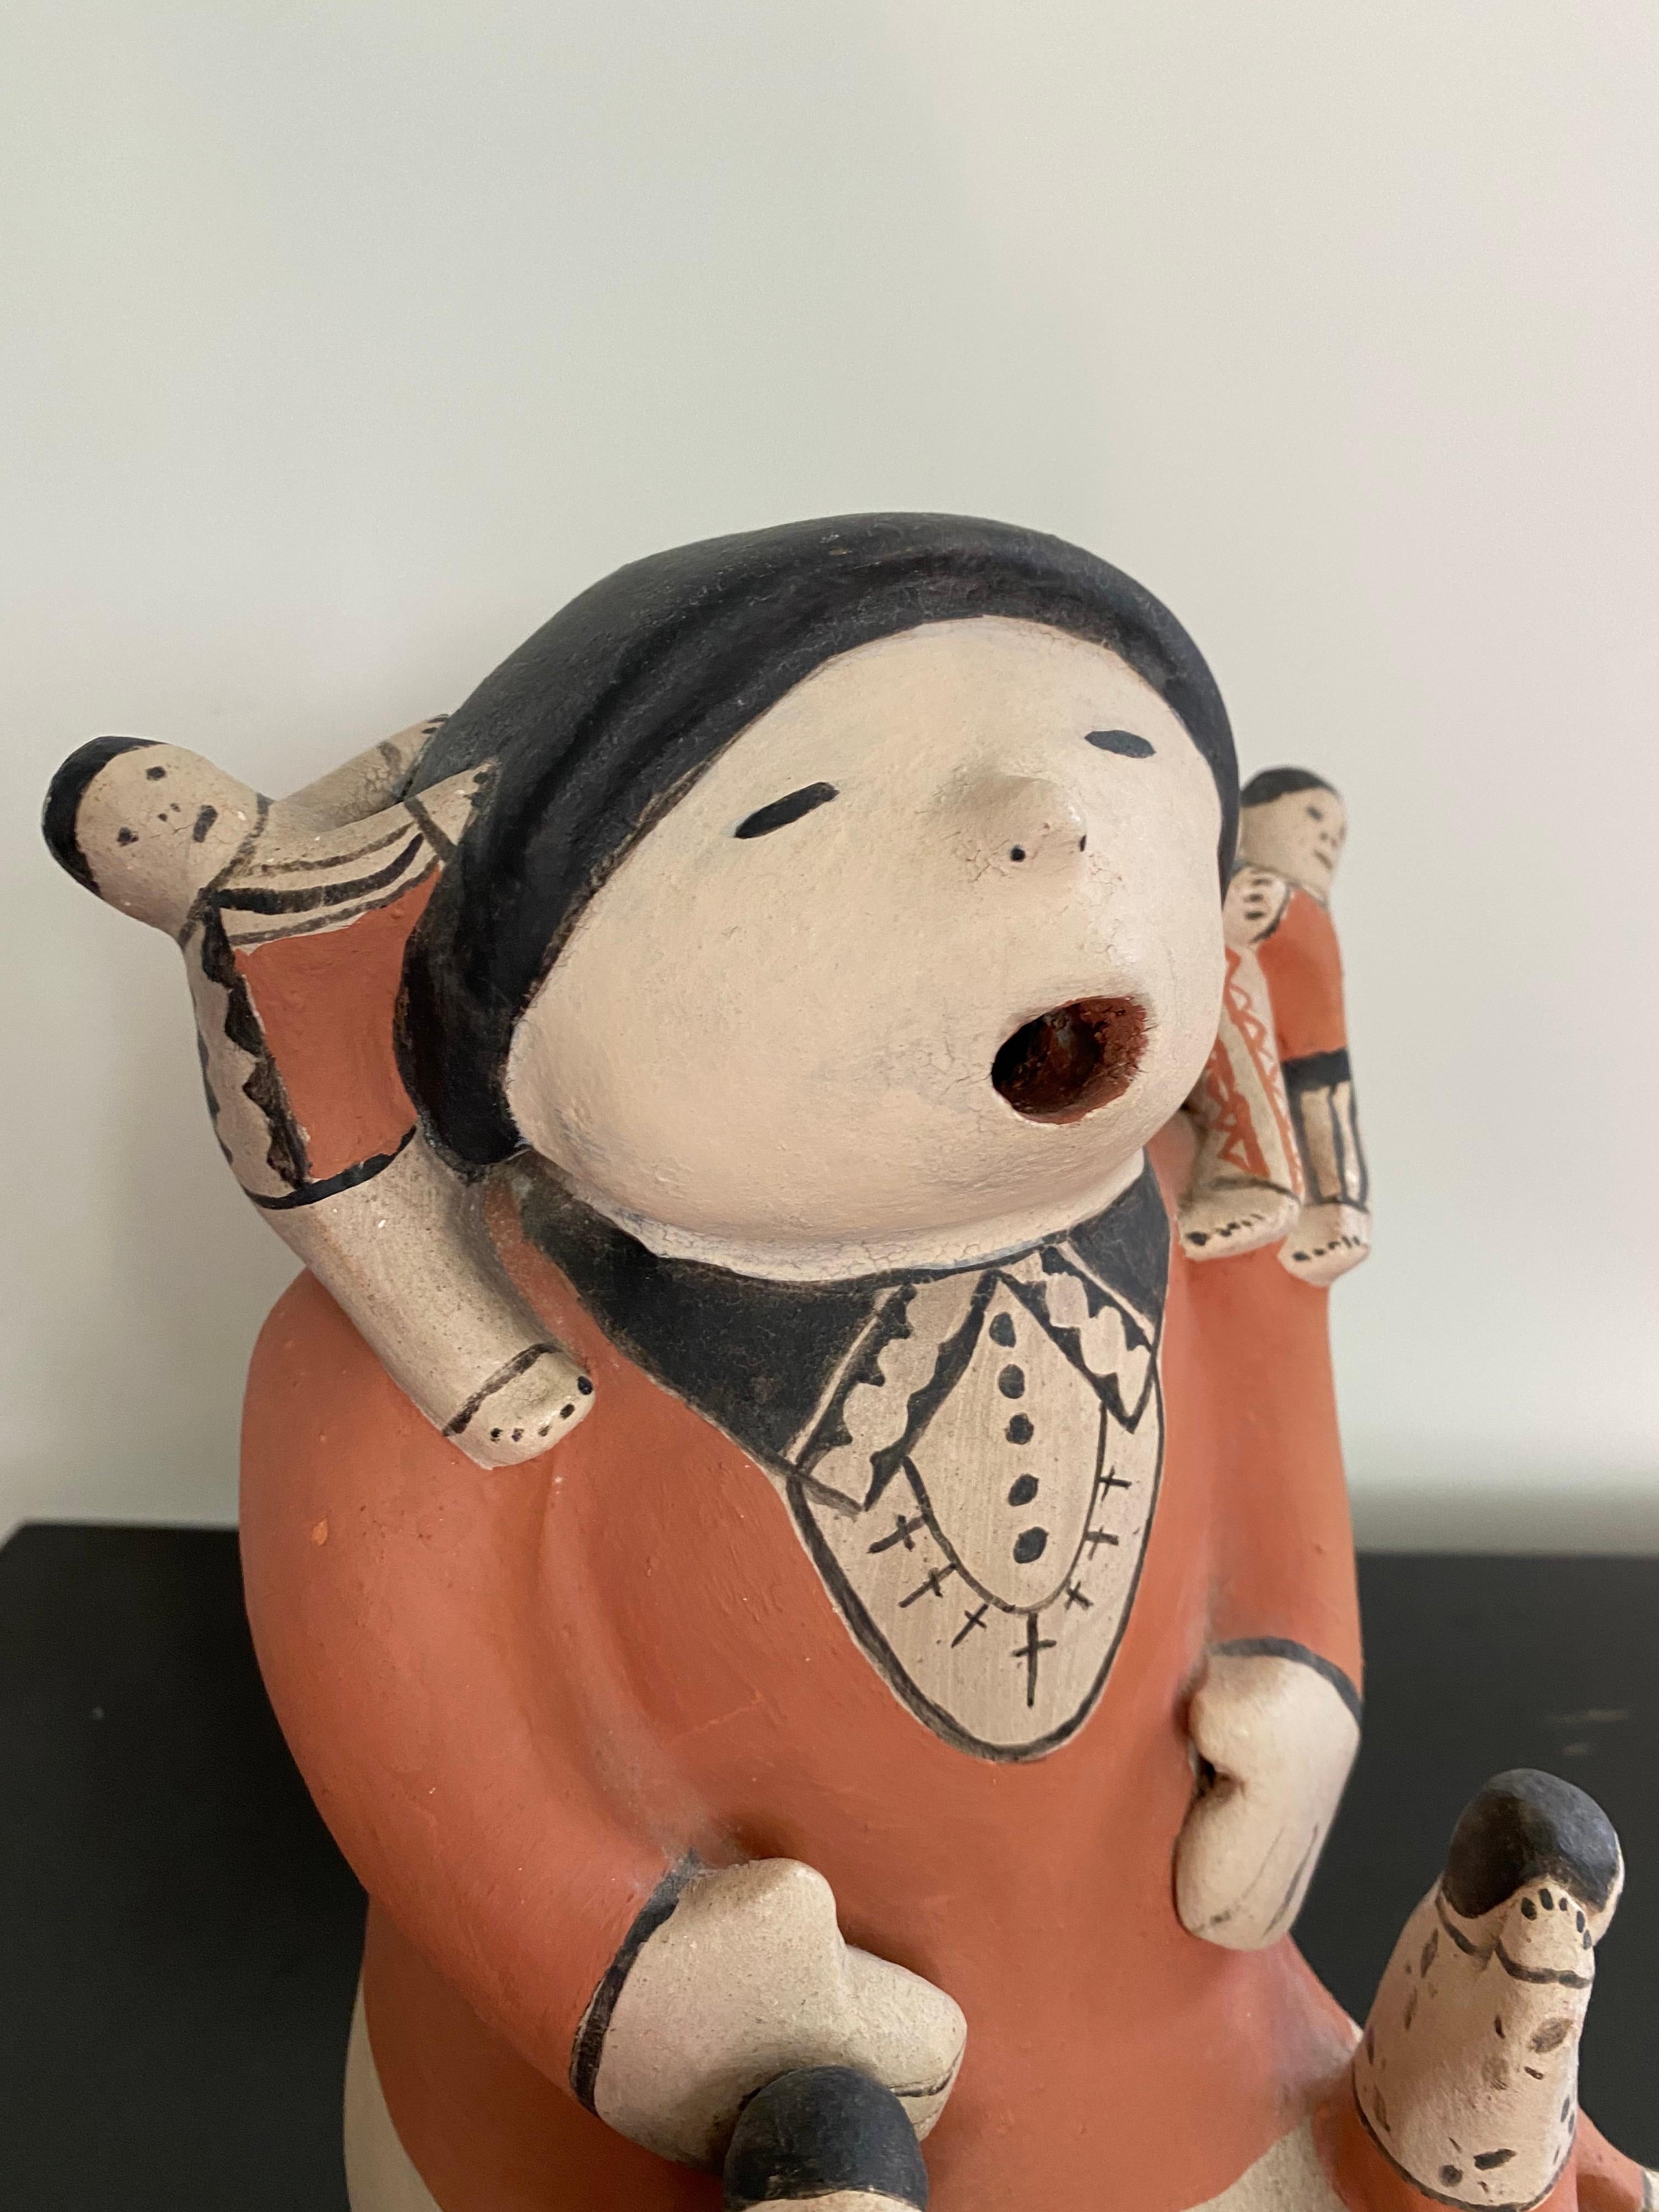 Helen Cordero story tellers ceramic figure. The famous Grande Dame of Story Teller Potters. This piece was among her last creations, 1989. Singing Mother Motif, Clay is a living substance! Figurines are like living being in Pueblo lore, Storytellers